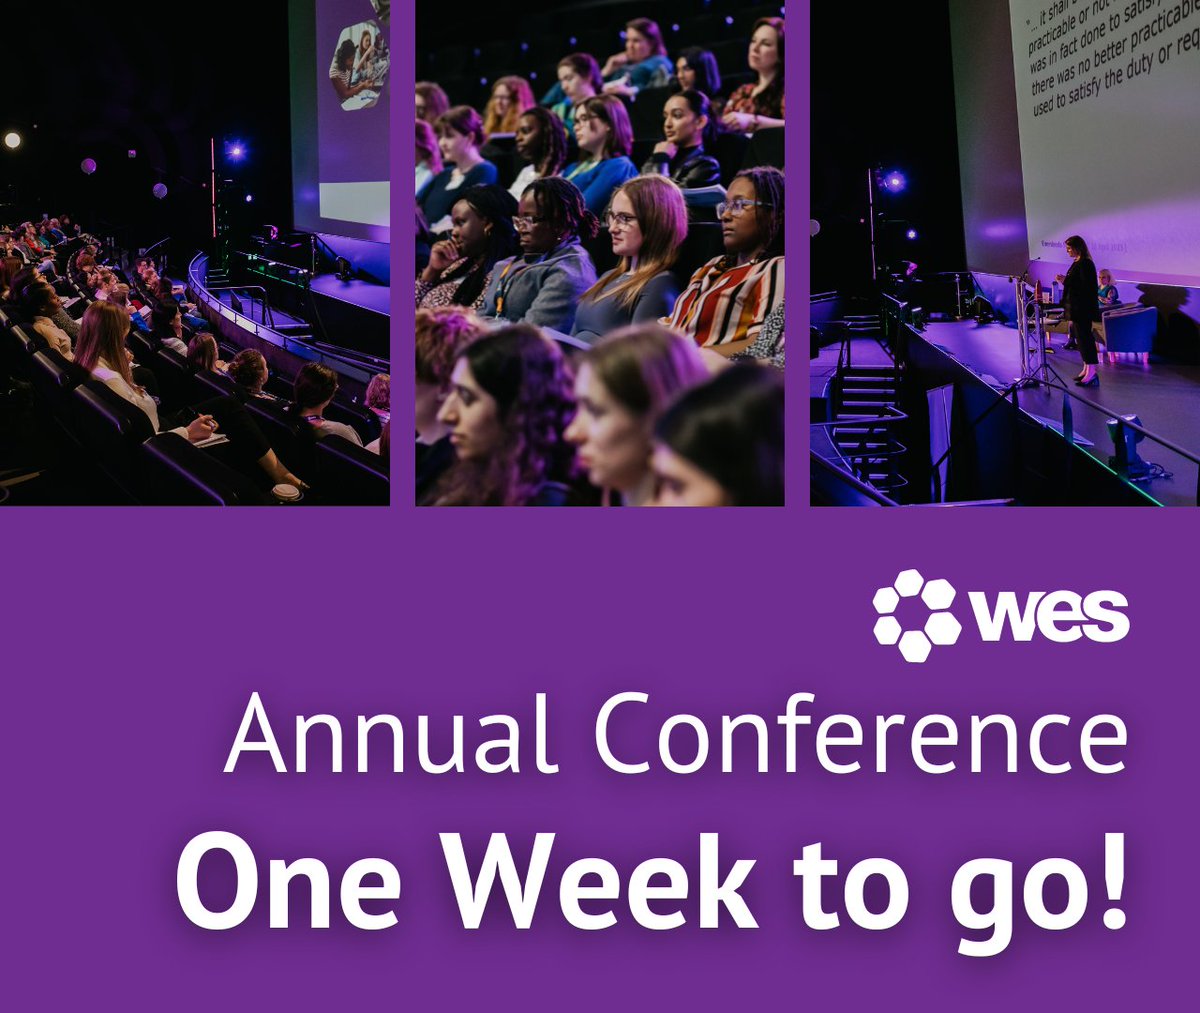 Just 7 days left until we connect, Learn, and network at our #WESAnnualConference Are you joining us in Birmingham? Bookings close midnight tonight so book those final tickets now: ow.ly/nSre50R4sbn